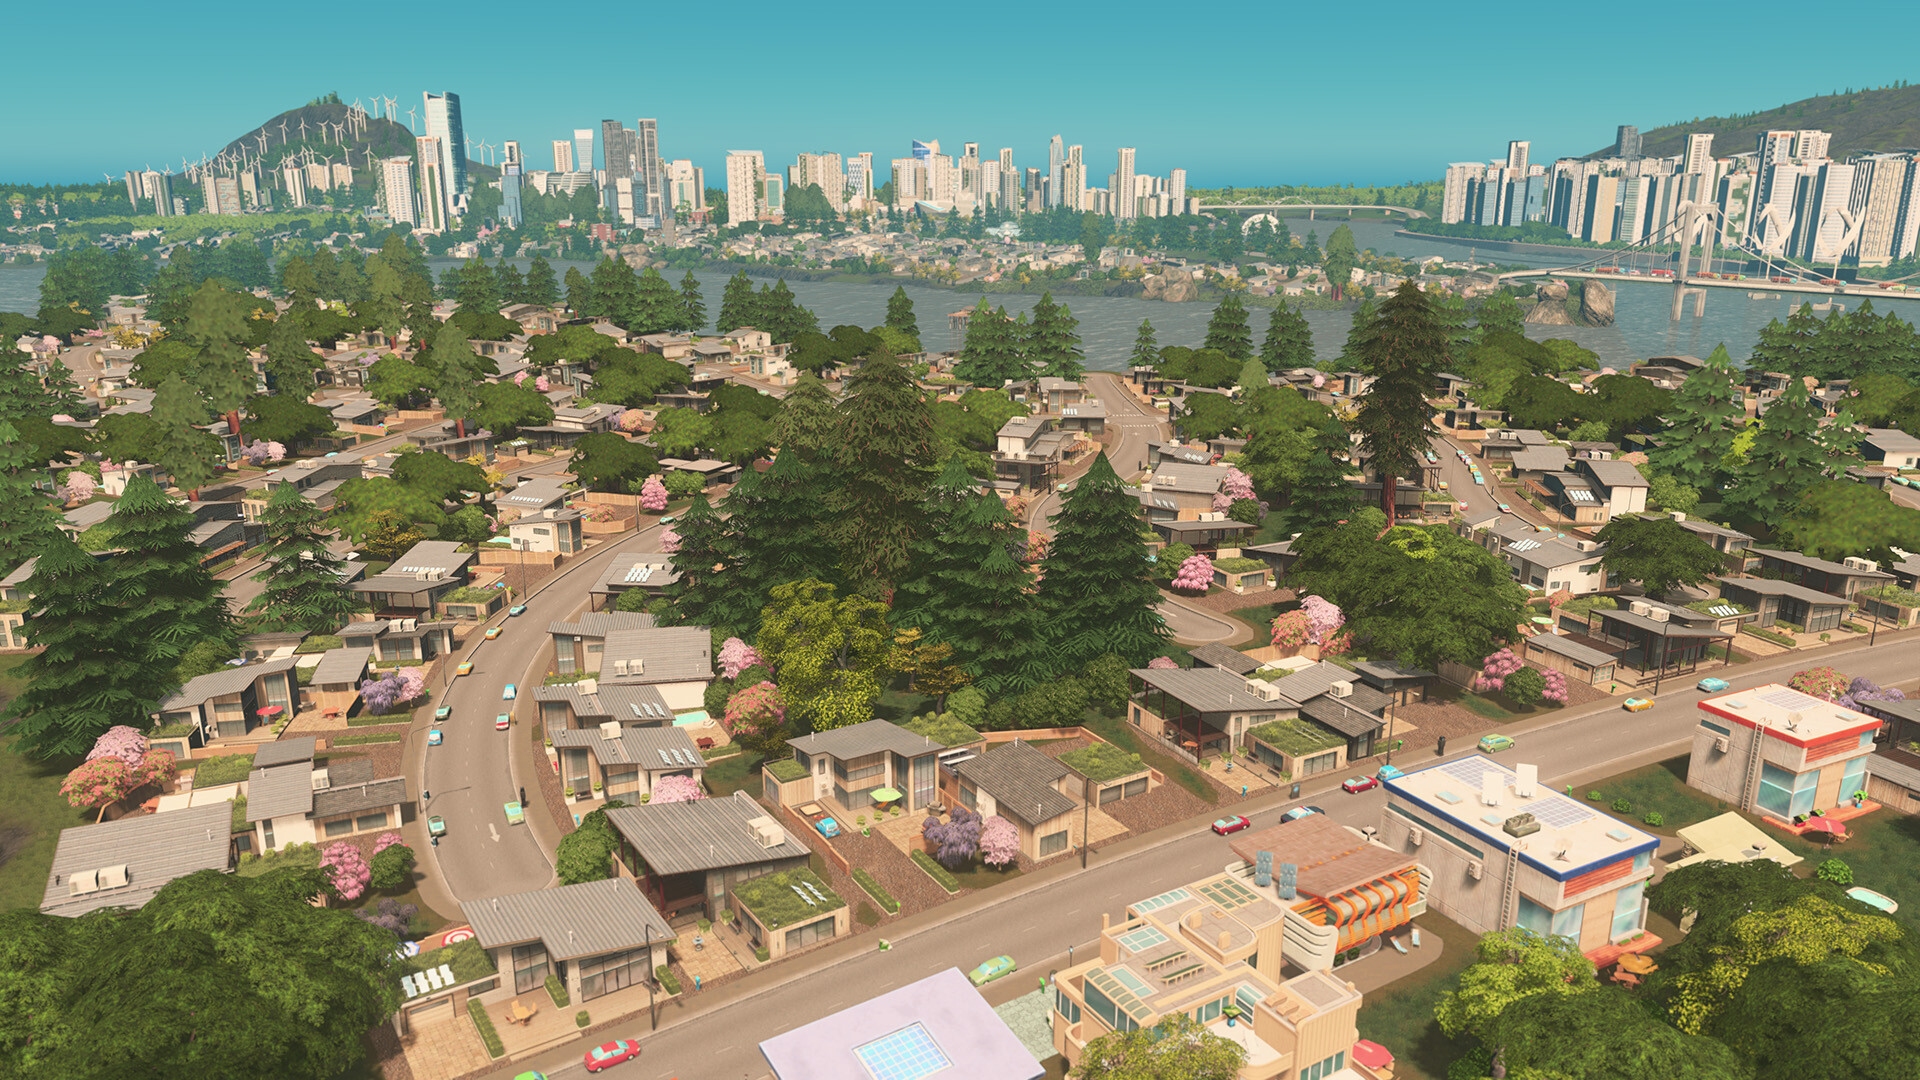 First reveal of Cities Skylines II gameplay, coming to Game Pass